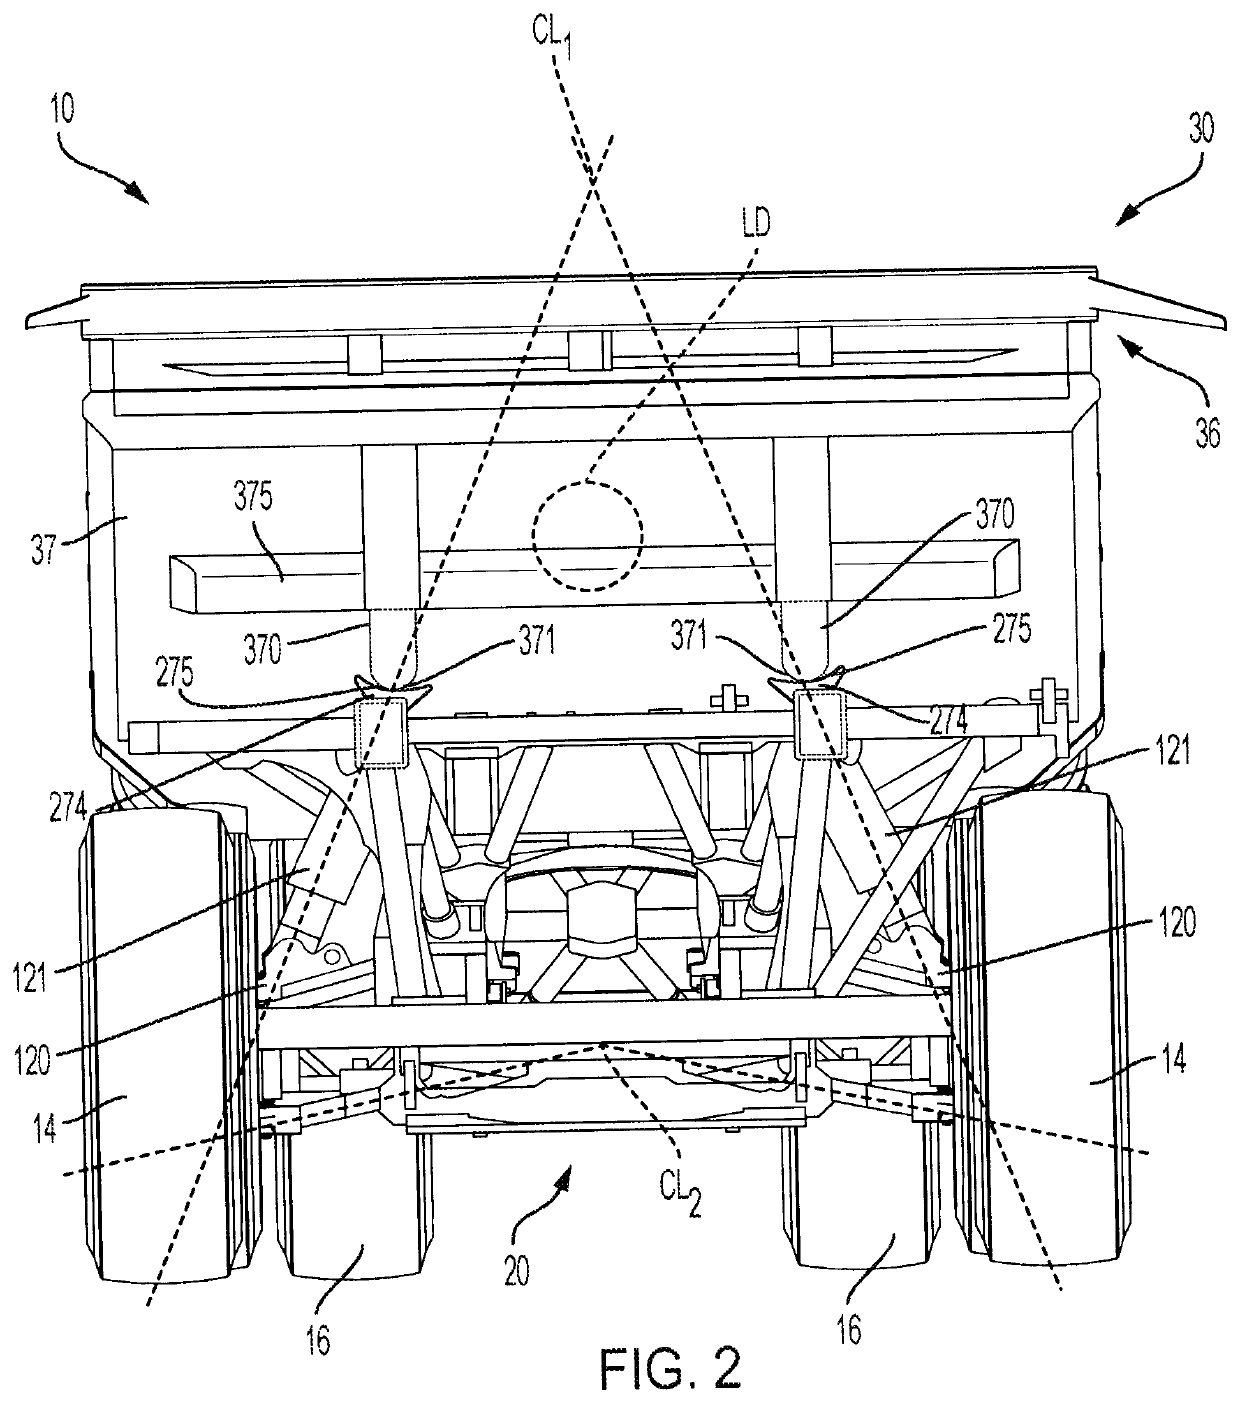 Space frame front lower suspension connection